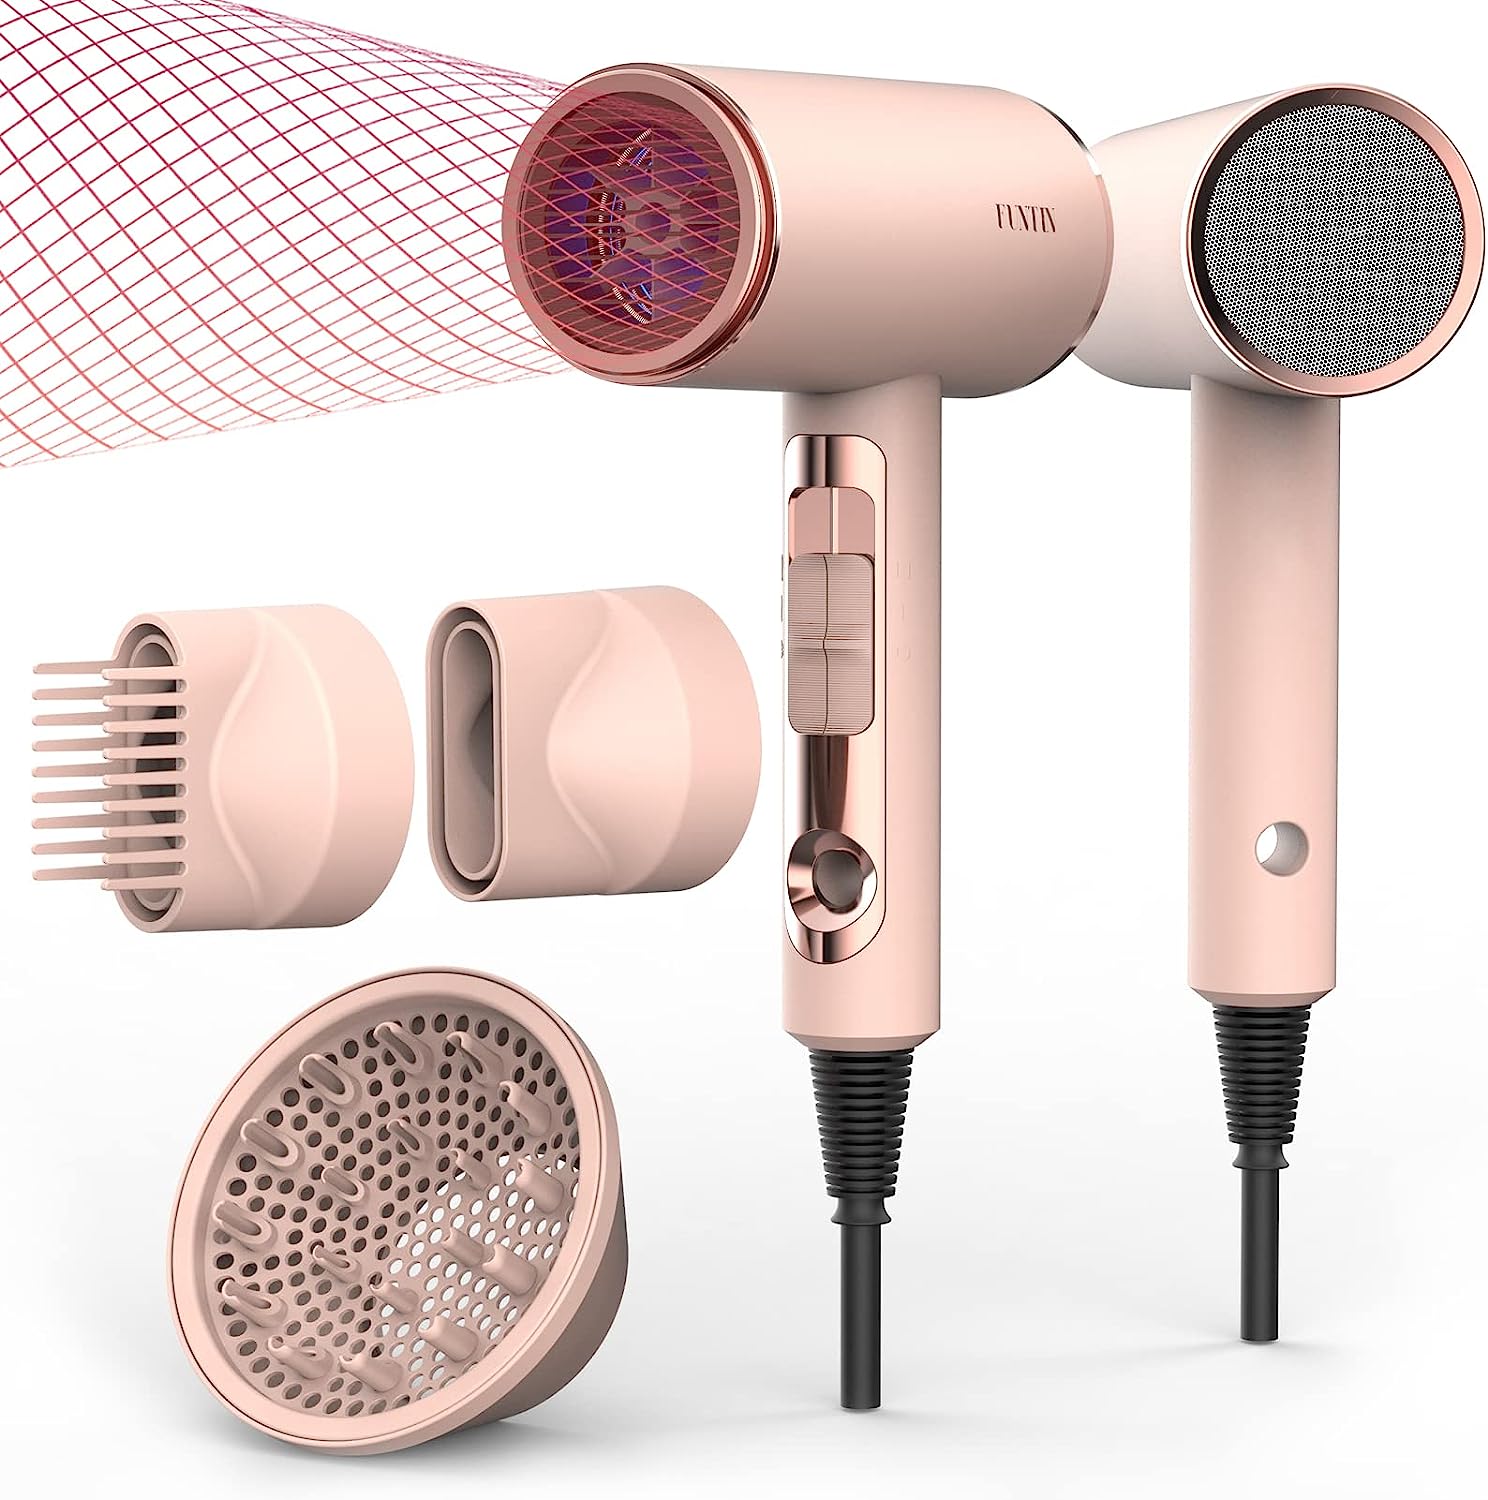 FUNTIN Hair Dryer with Diffuser Blow Dryer Comb Brush [...]